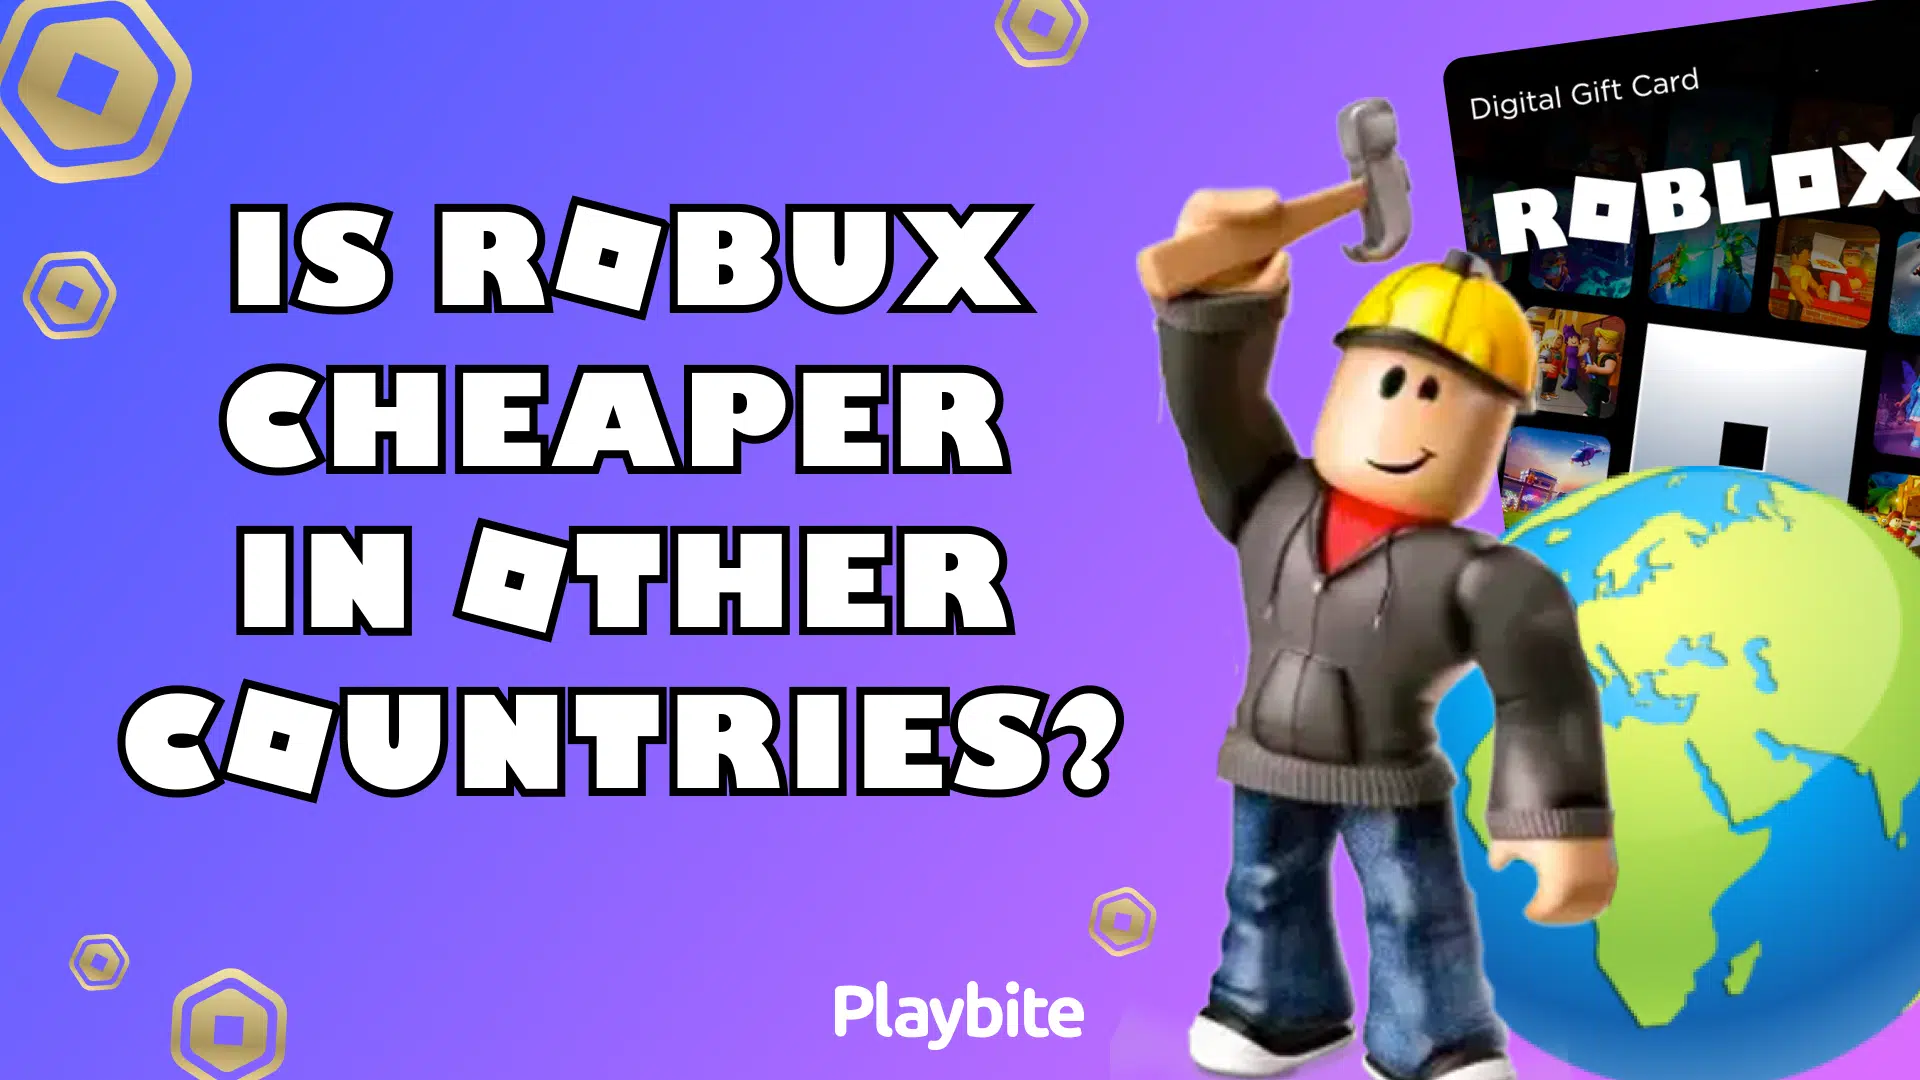 So now Apple users have to pay 12 euro for 800 Robux : r/roblox